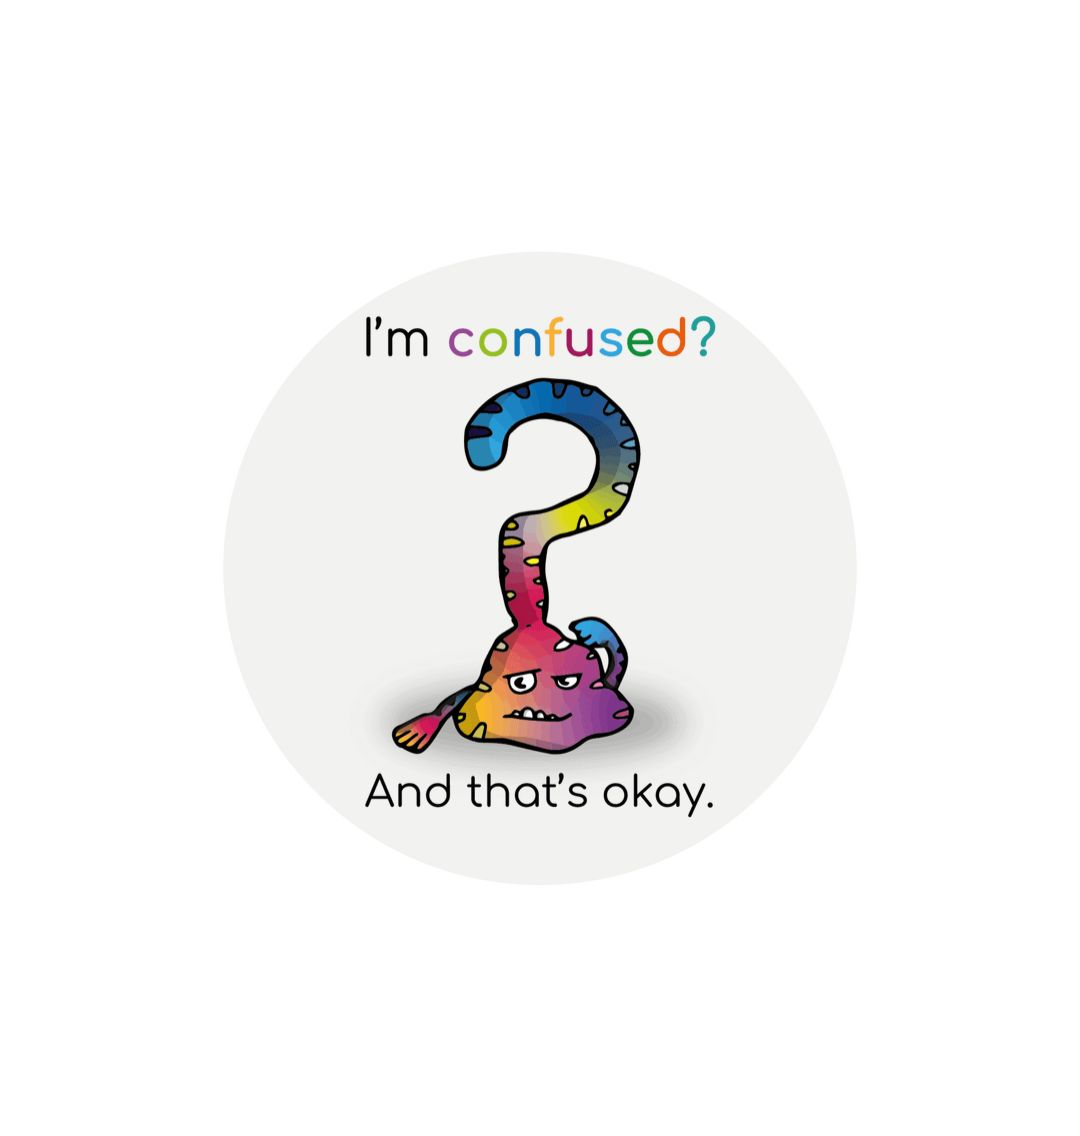 White \"I'm confused? And that's okay!\" Round Children's Emotions Sticker 60mm x 60mm